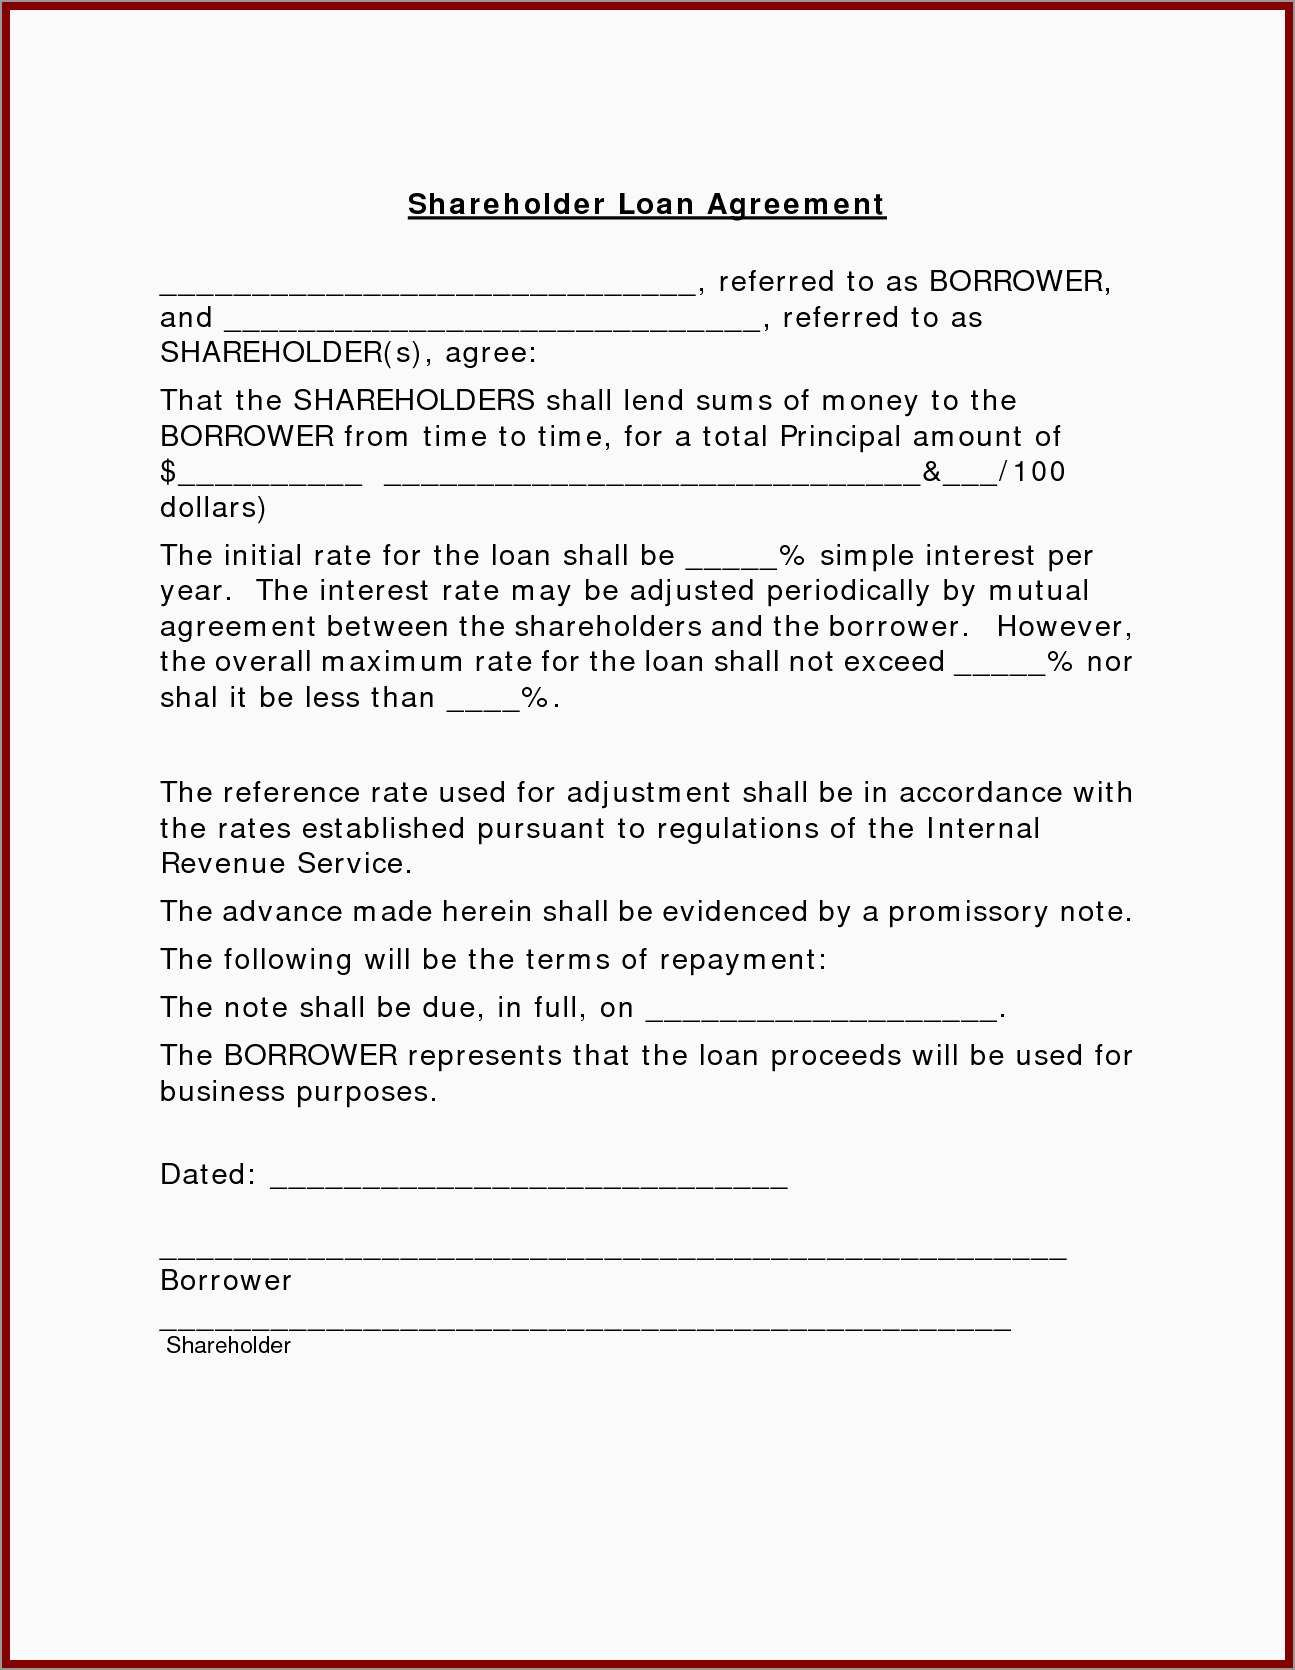 Beautiful Simple Loan Agreement Template Free  Best Of Template pertaining to Free Shareholder Loan Agreement Template